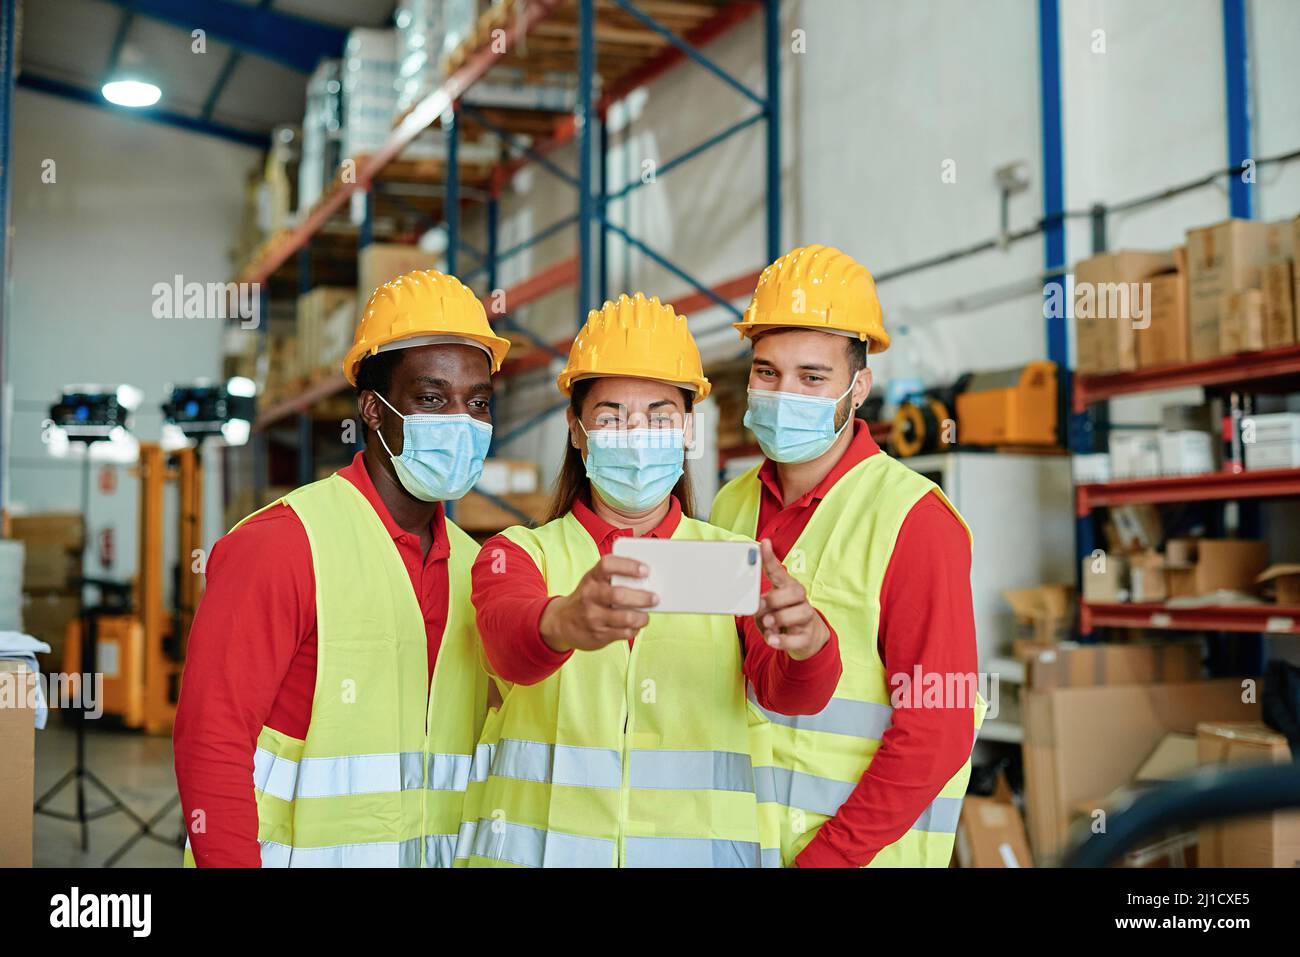 Happy multiracial workers taking a selfie inside the warehouse safety clothing - Focus on the woman's face. Stock Photo